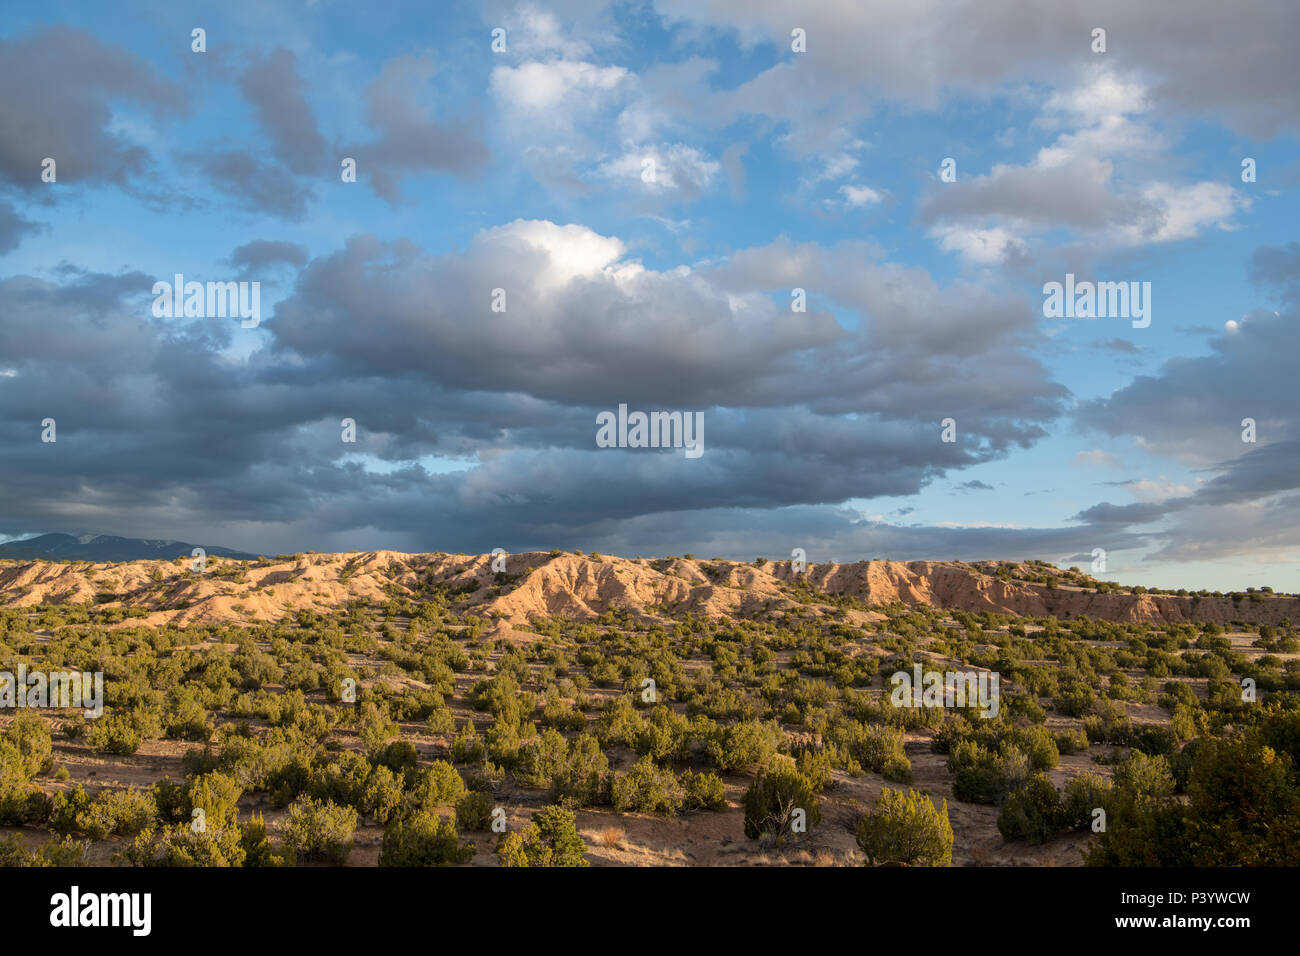 Dramatic evening sky and clouds over desert and badlands near Santa Fe, New Mexico Stock Photo